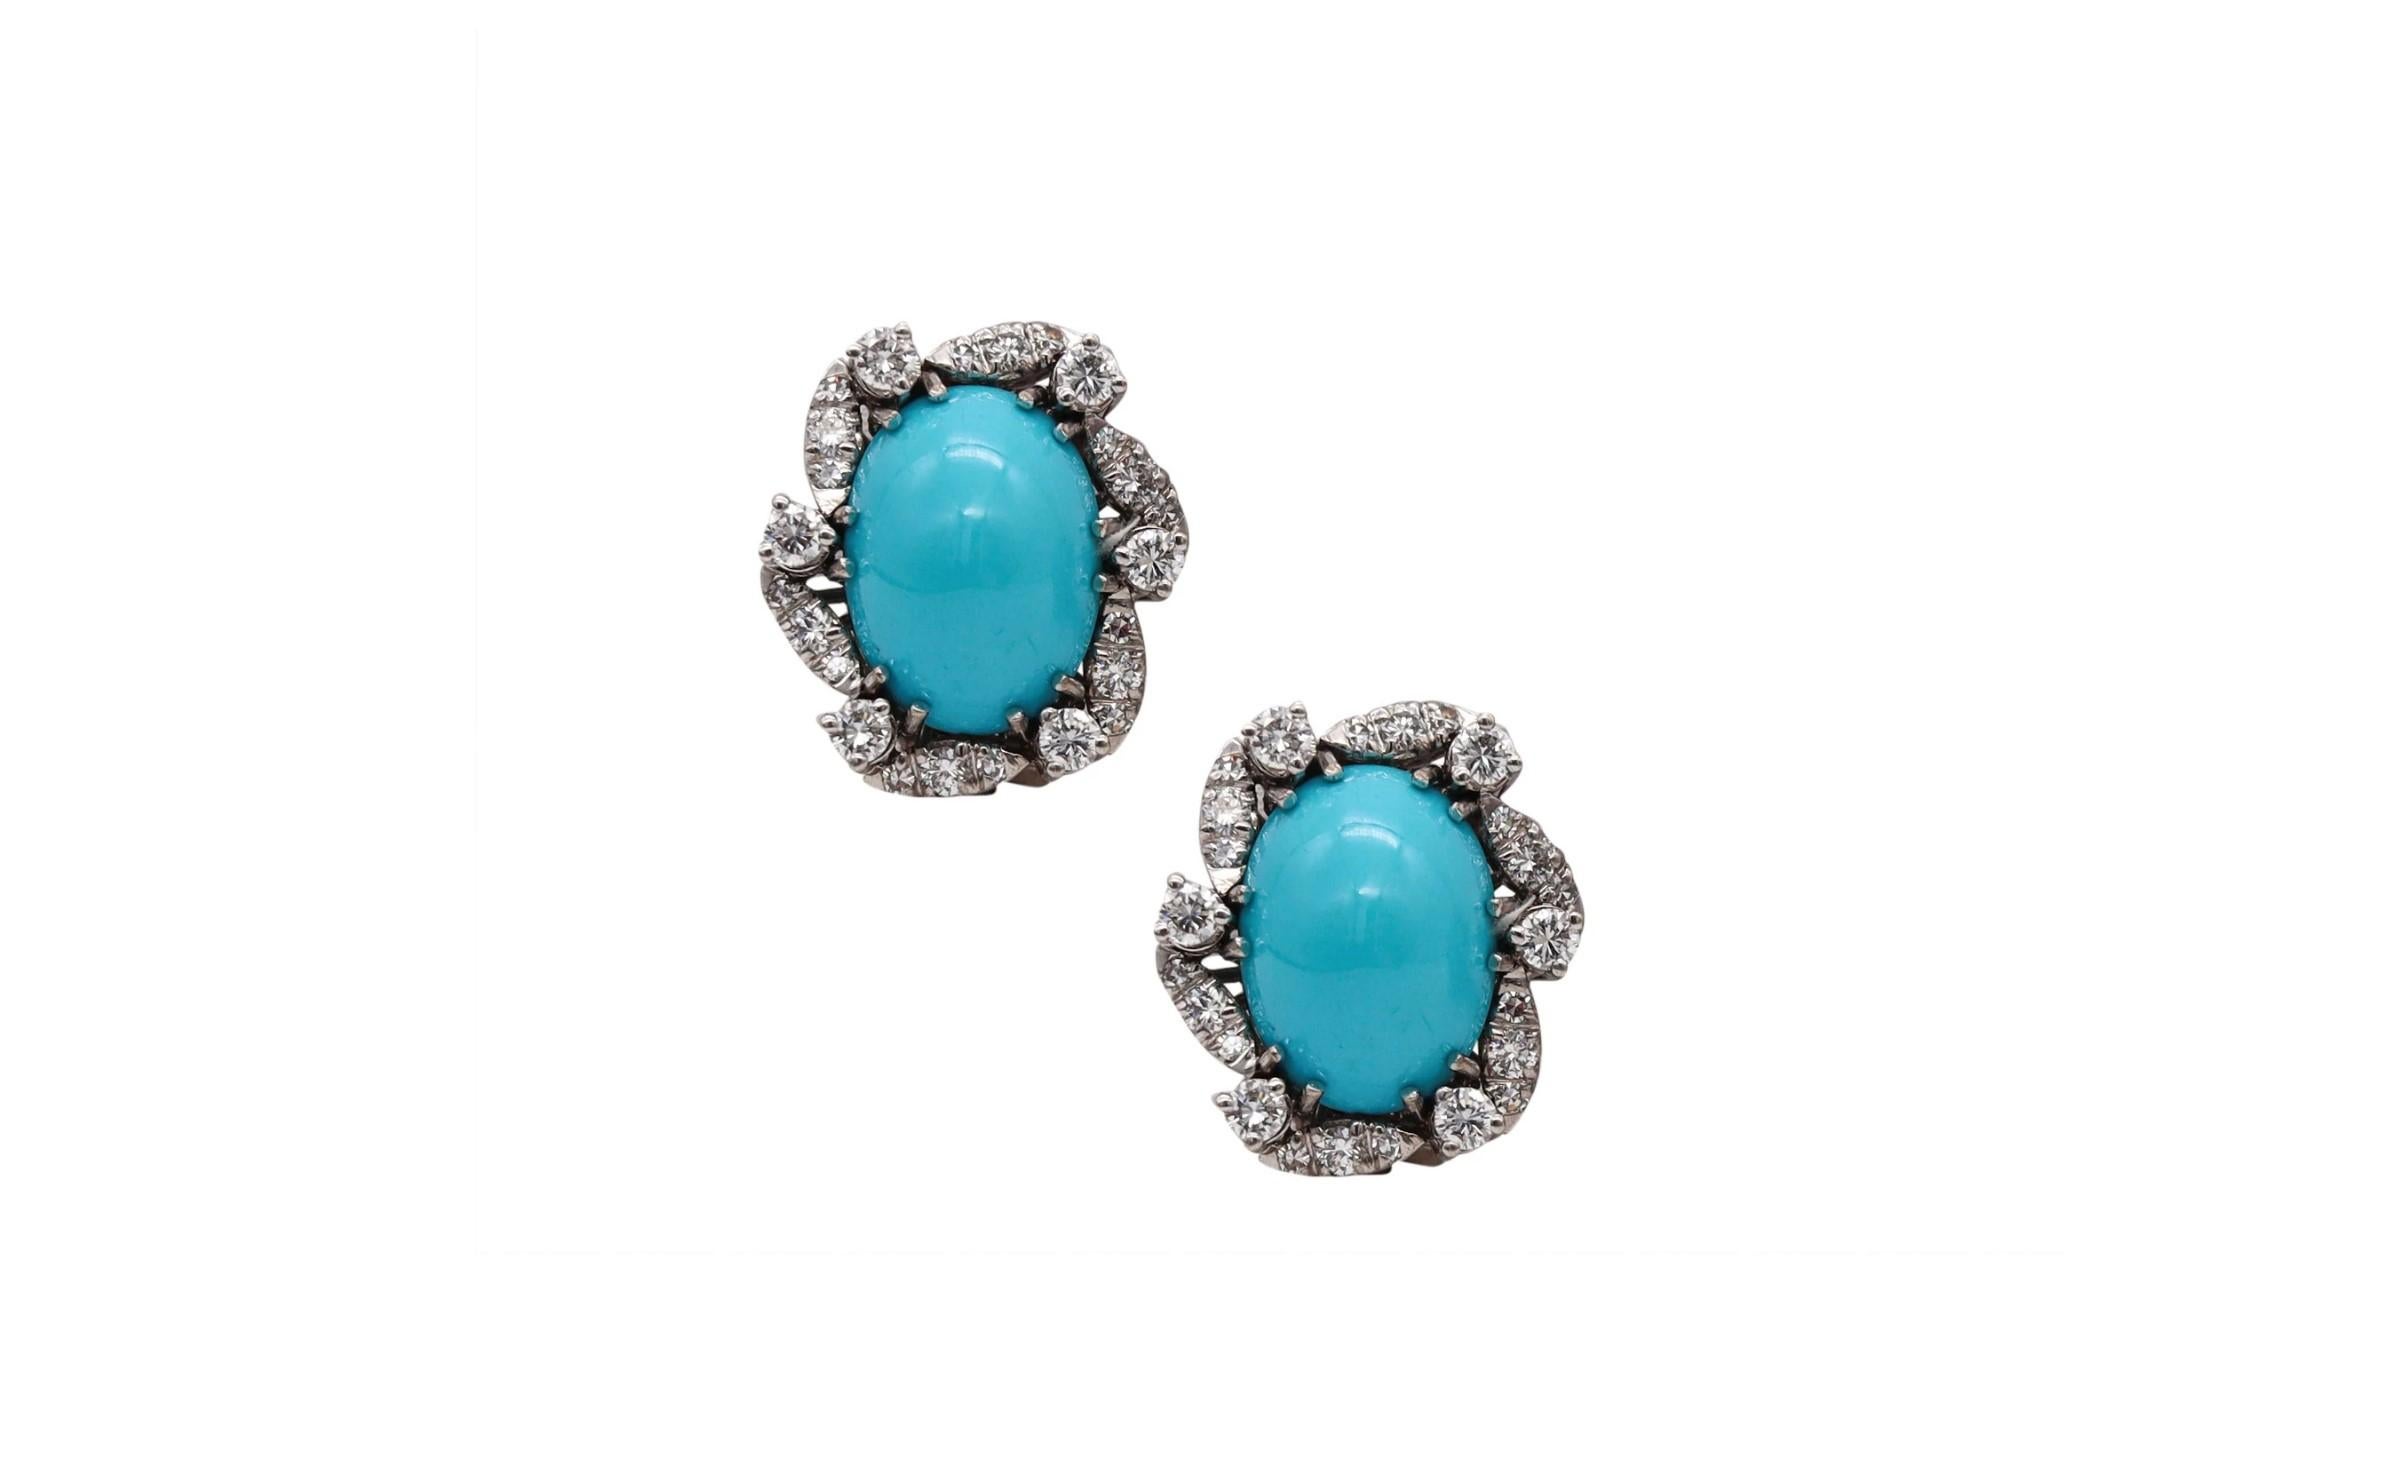 Austria 1950 Late Deco Earrings Platinum with 19.12 Cts in Diamonds & Turquoises 1